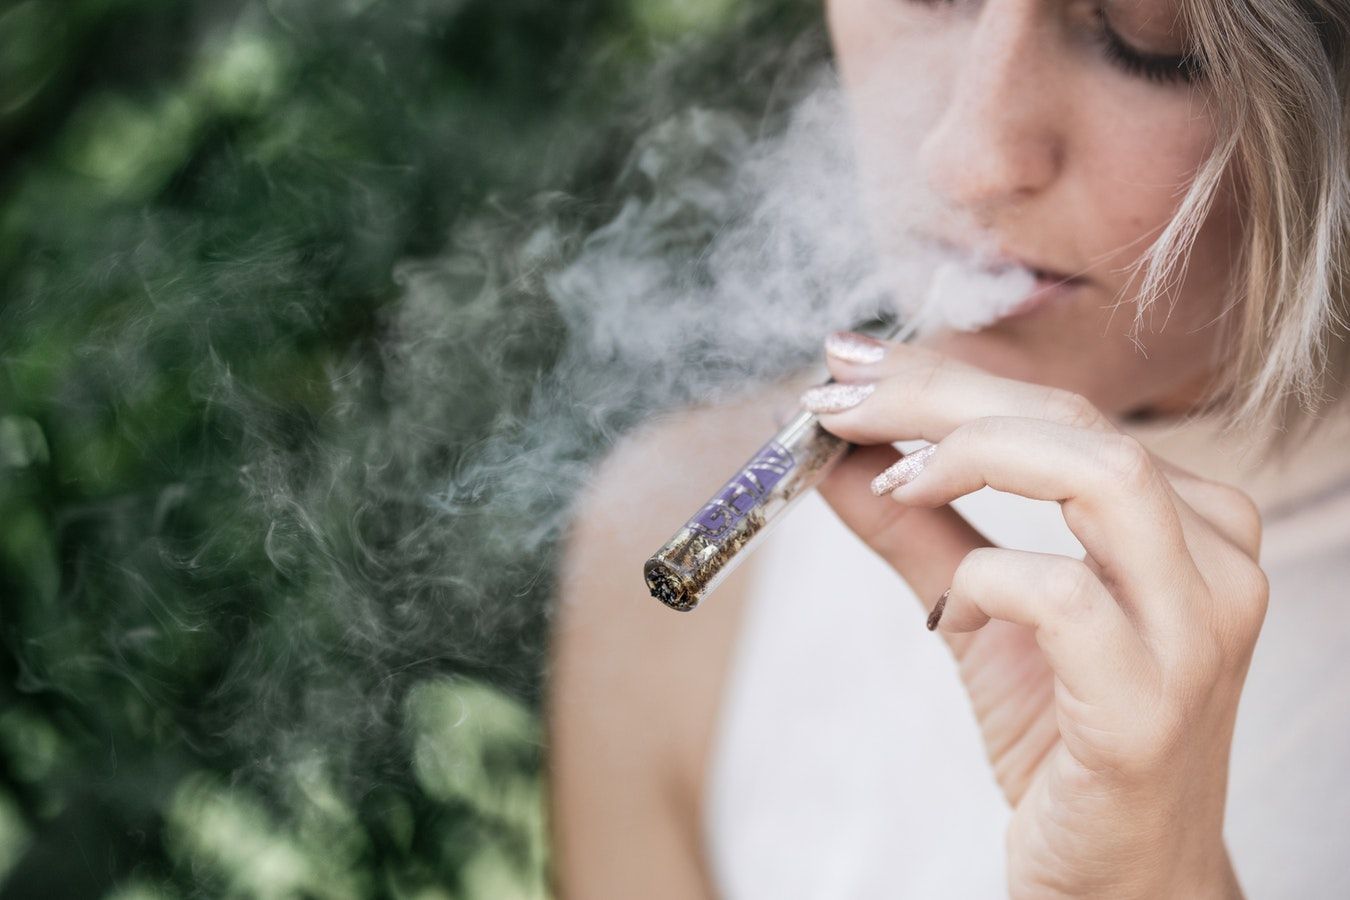 Does smoking cannabis cause lung cancer?